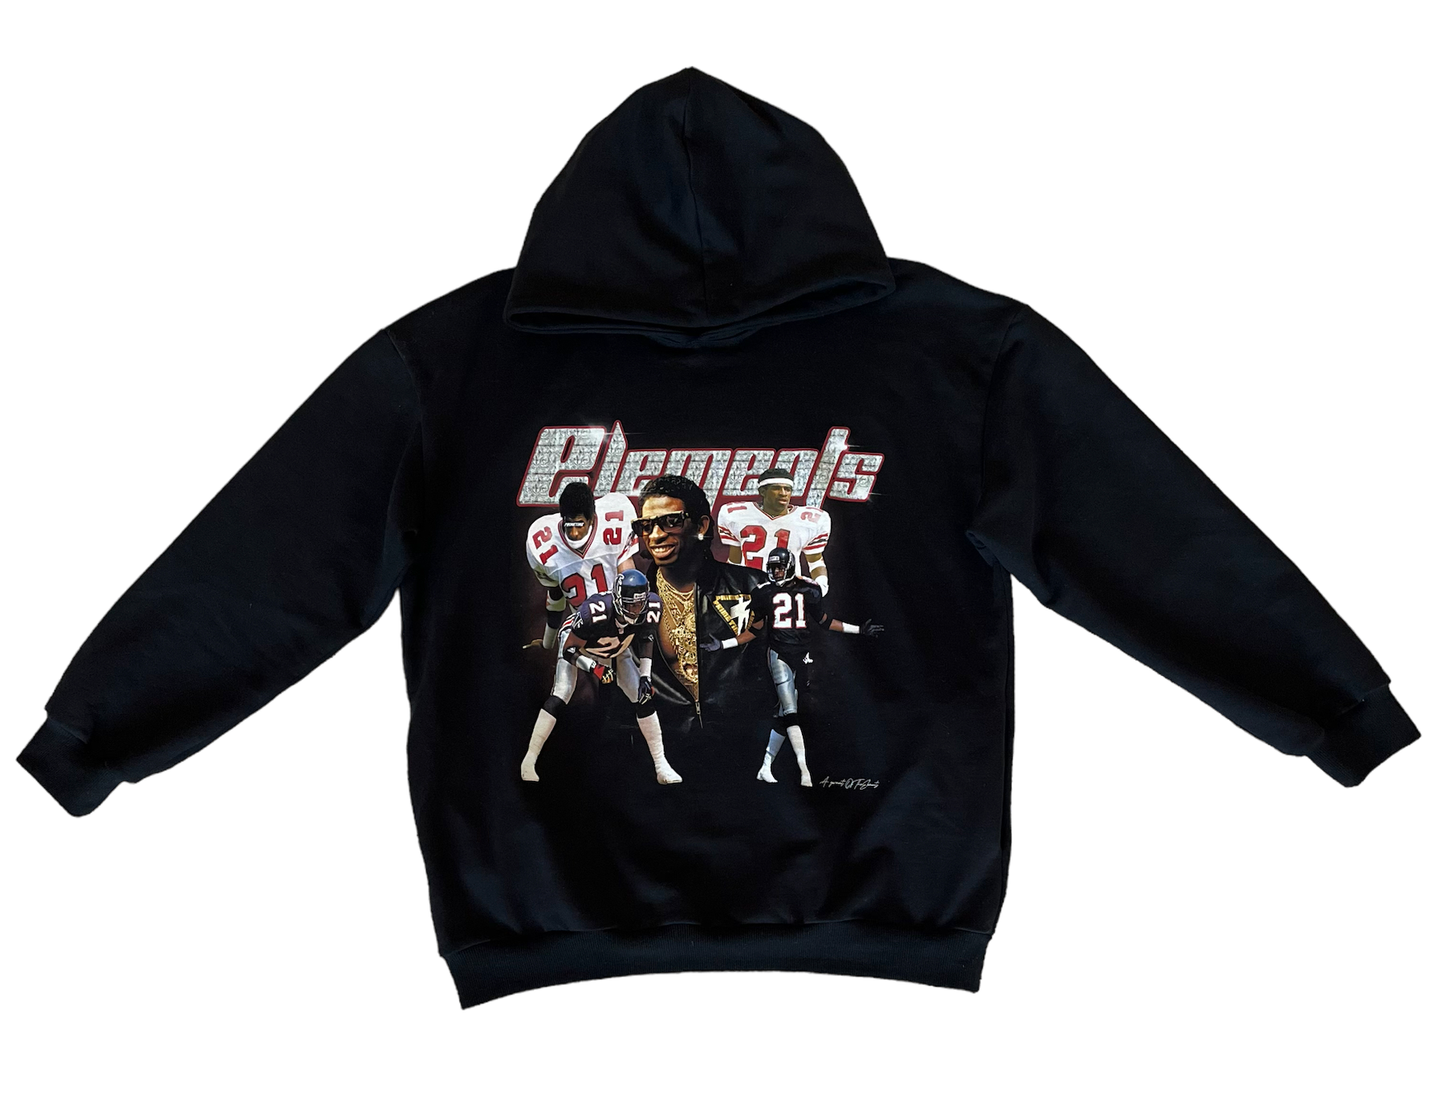 Elements "Primetime" Hoodie *Limited Edition*